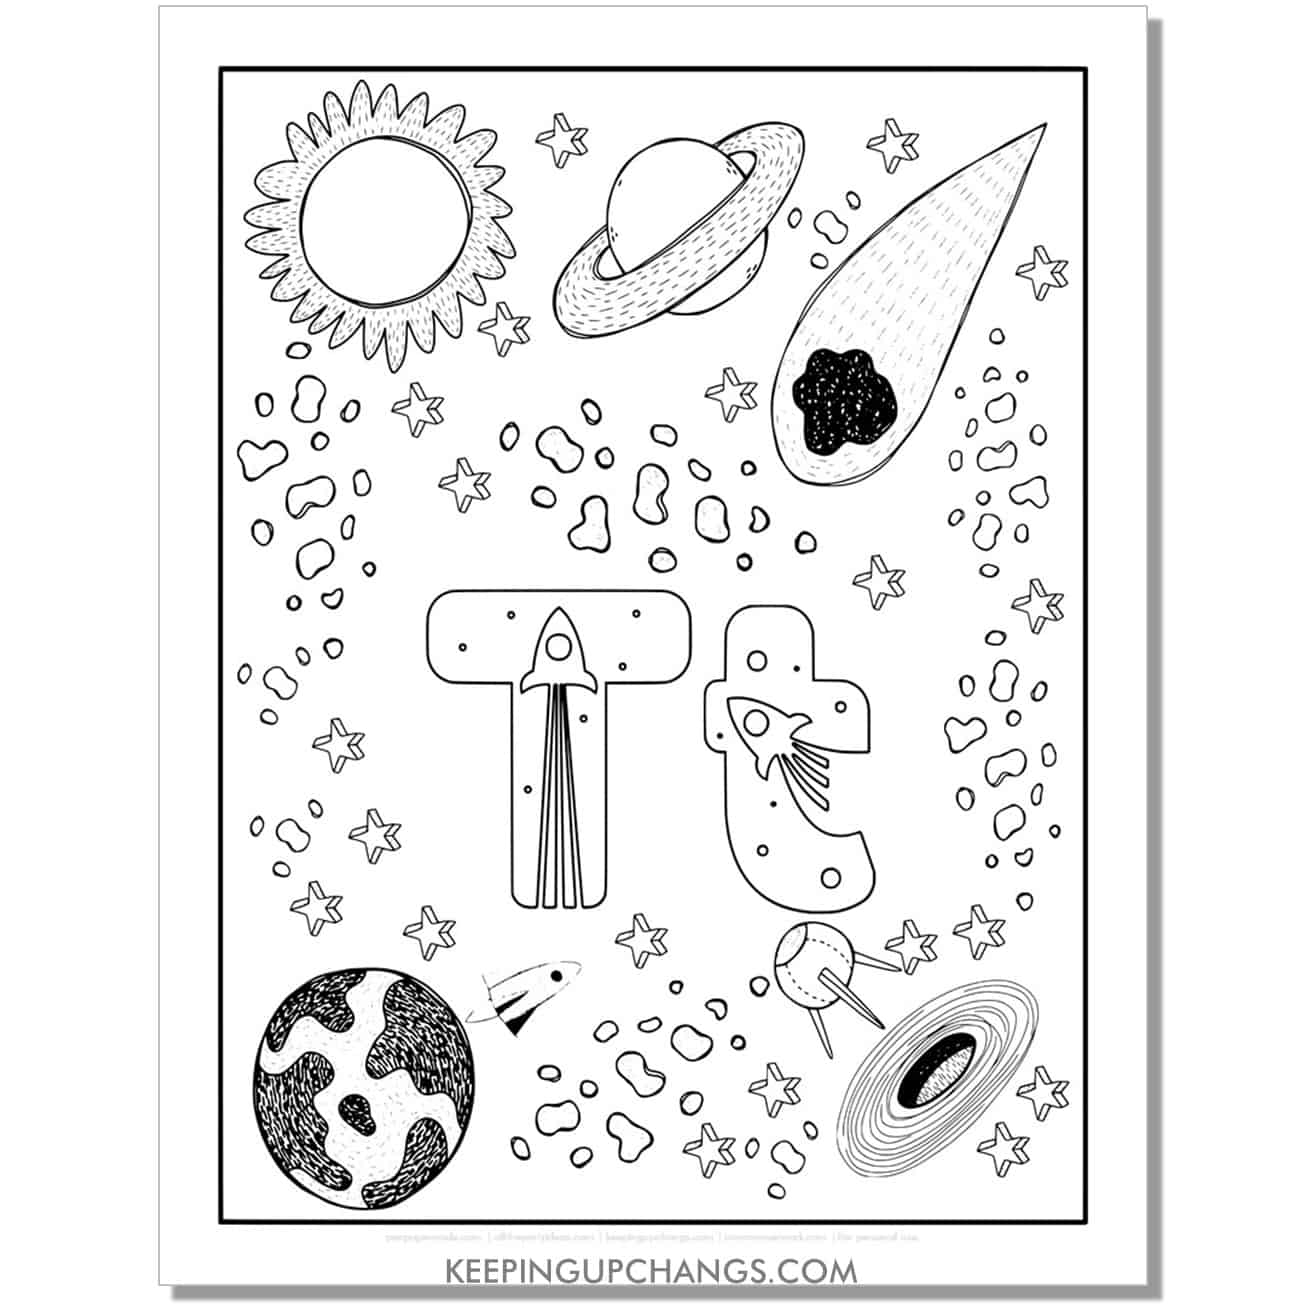 free alphabet letter t coloring page for kids with rockets, space theme.